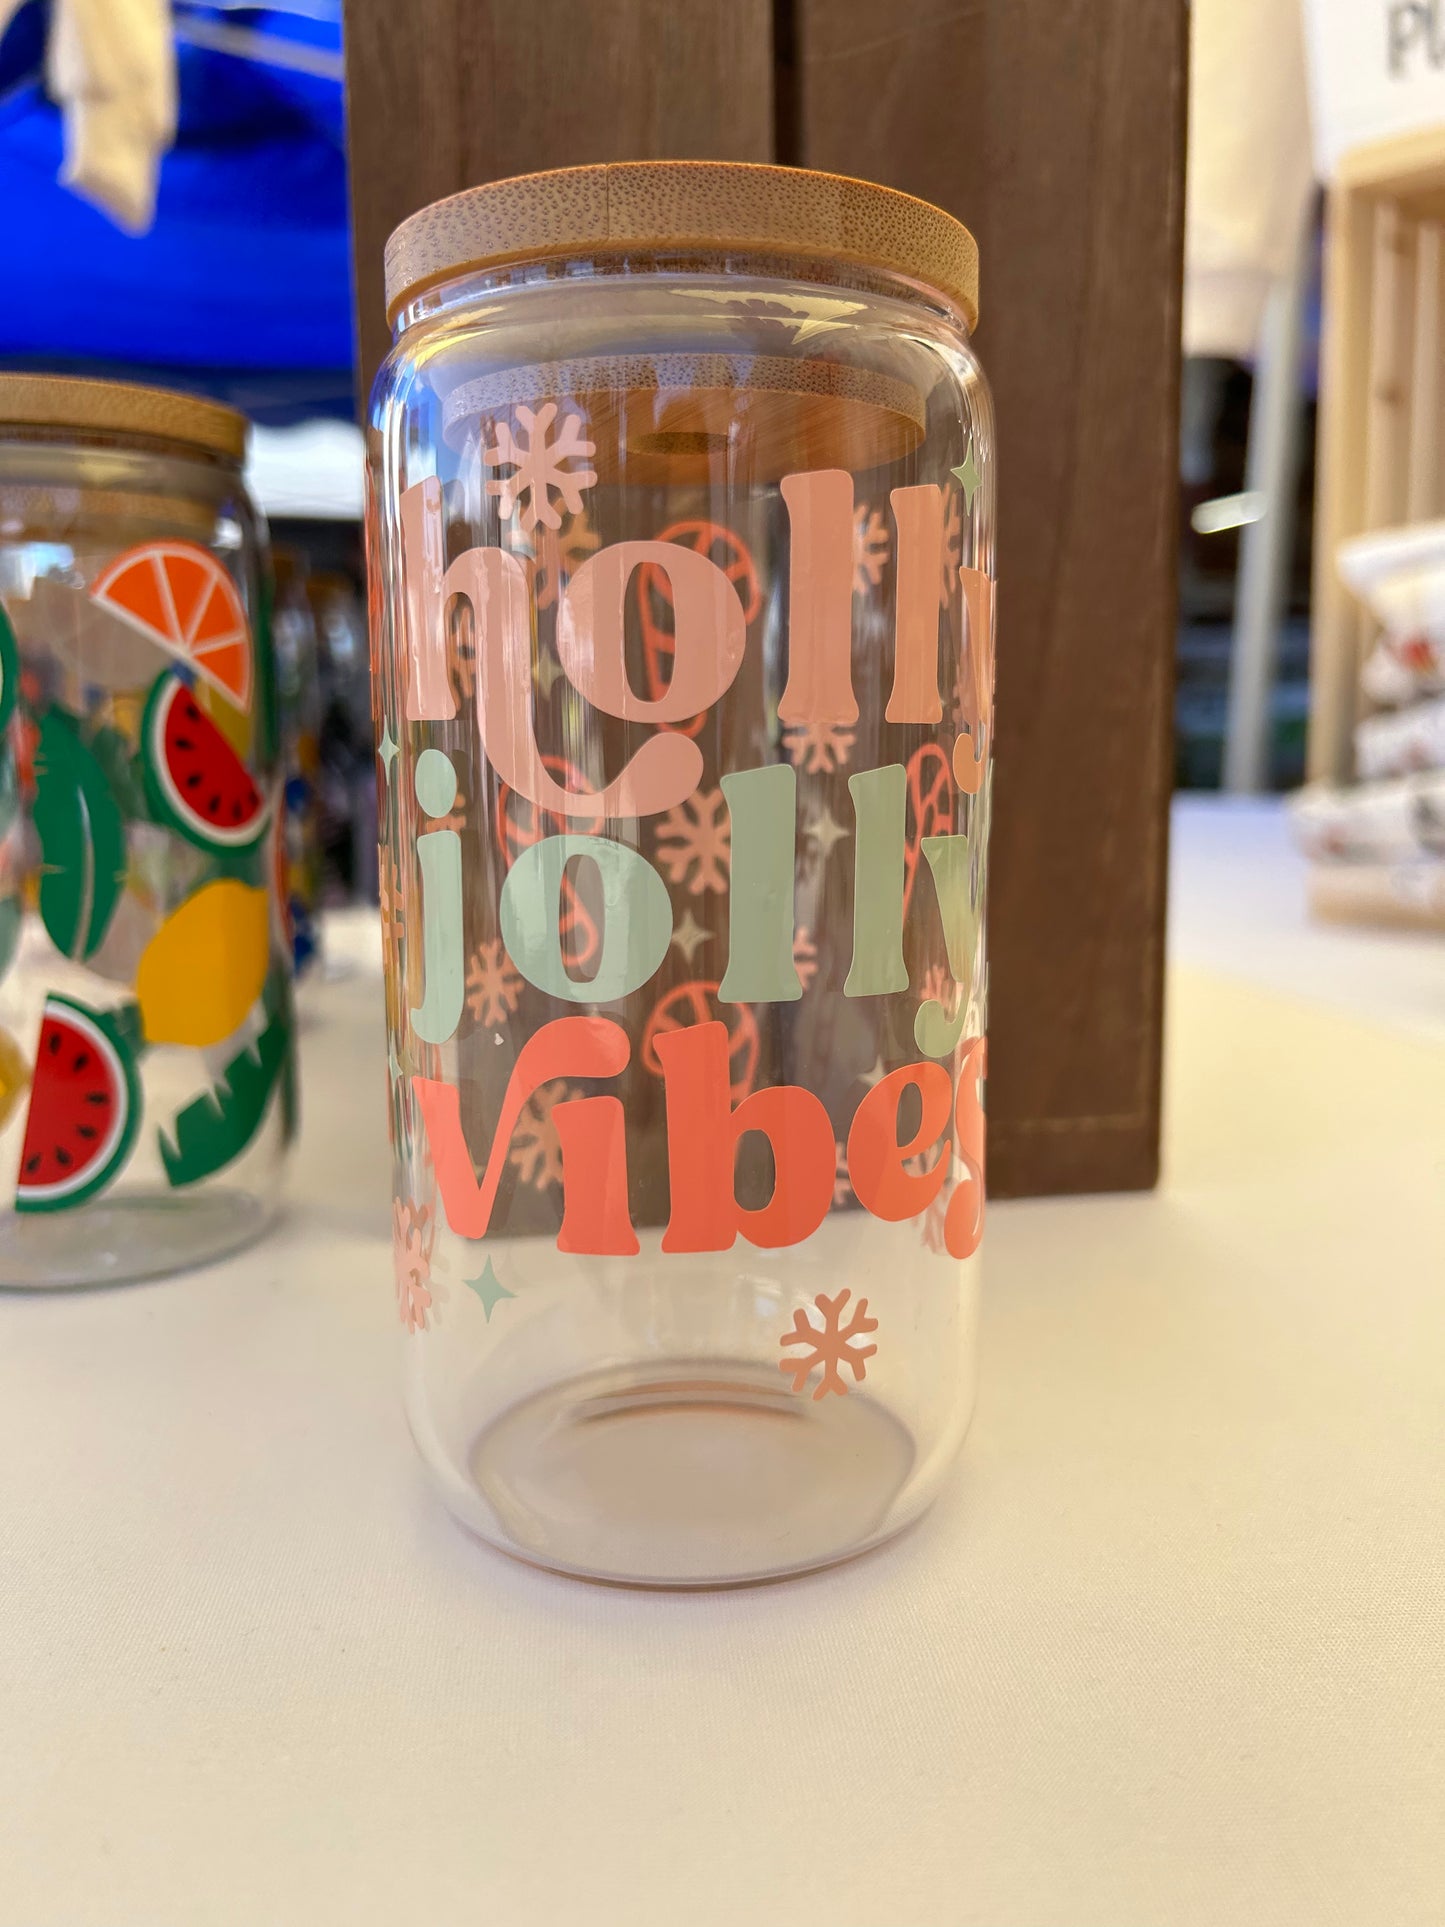 Holly Jolly Vibes Christmas Glass Cup